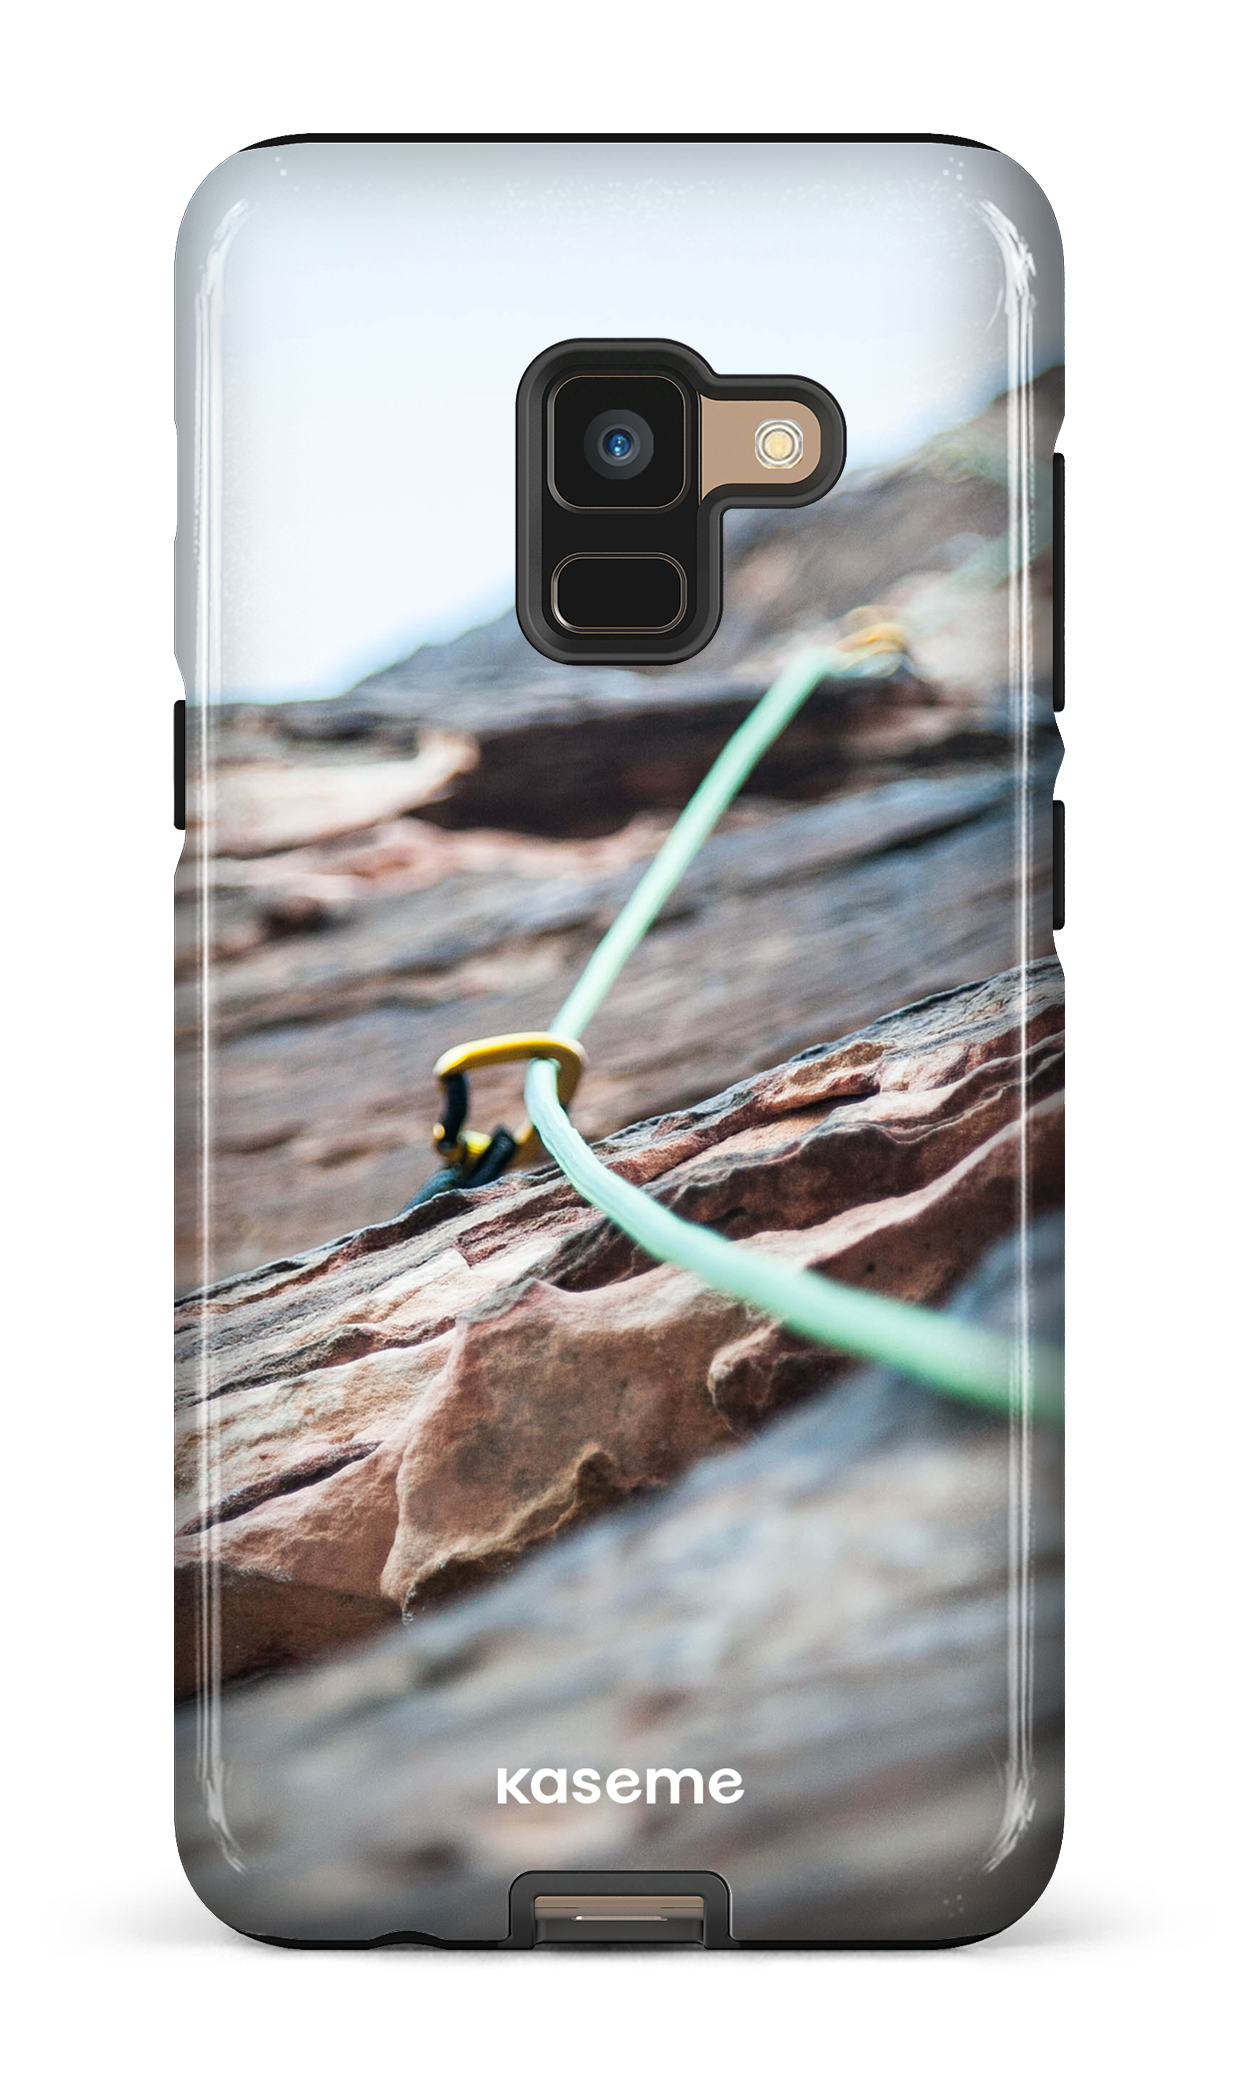 Top rope - Galaxy A8